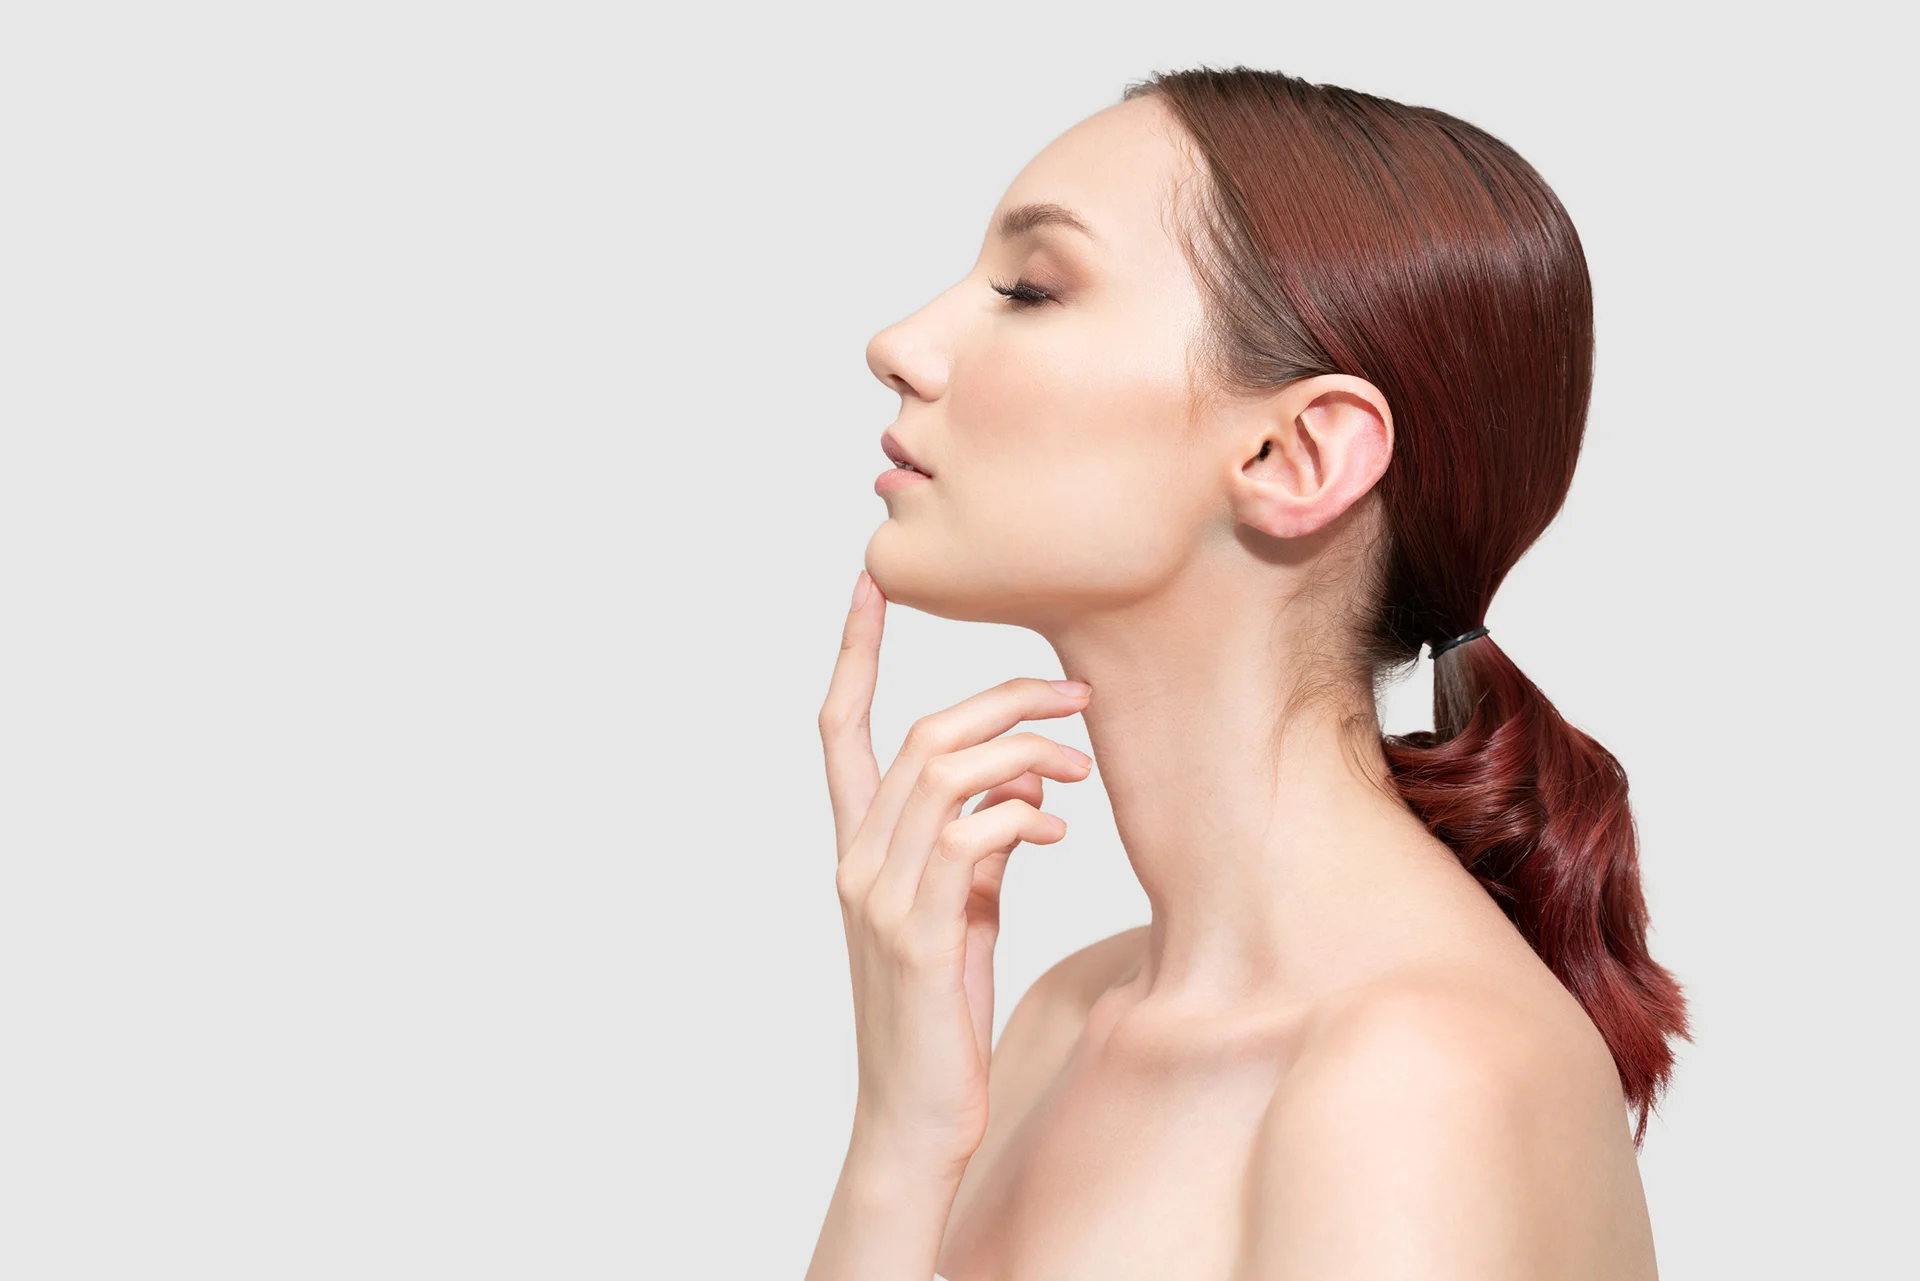 A woman's face with her hand on her chin, exploring the possibilities of managing a chin lipo scar.